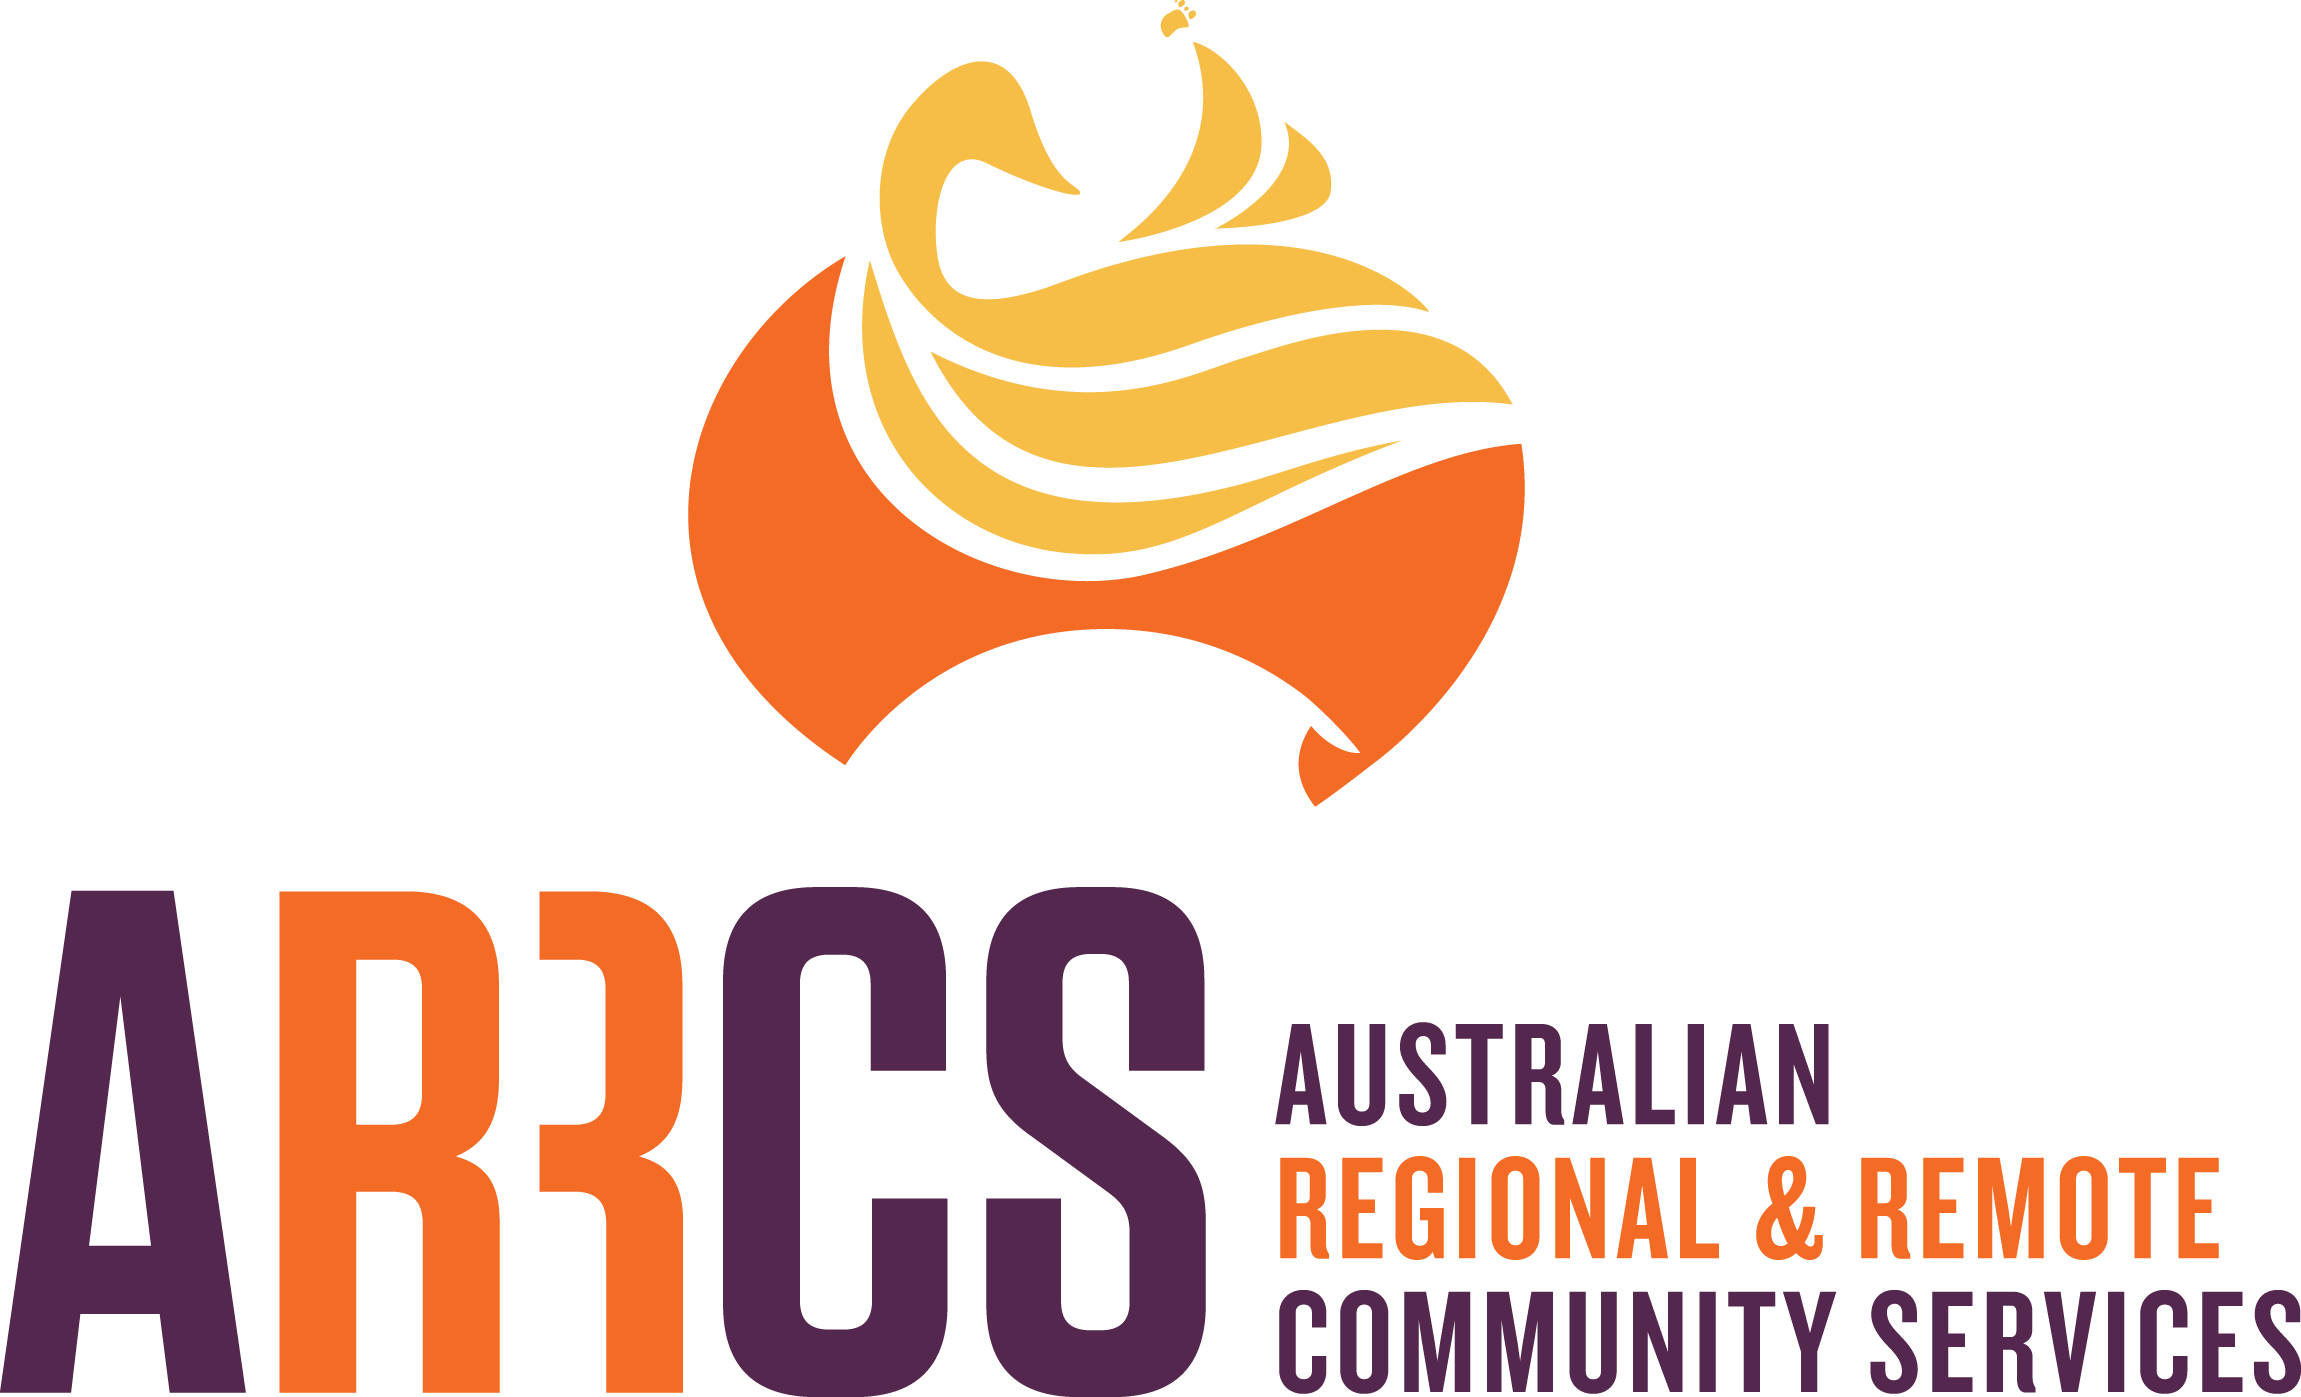 AUSTRALIAN REGIONAL AND REMOTE COMMUNITY SERVICES